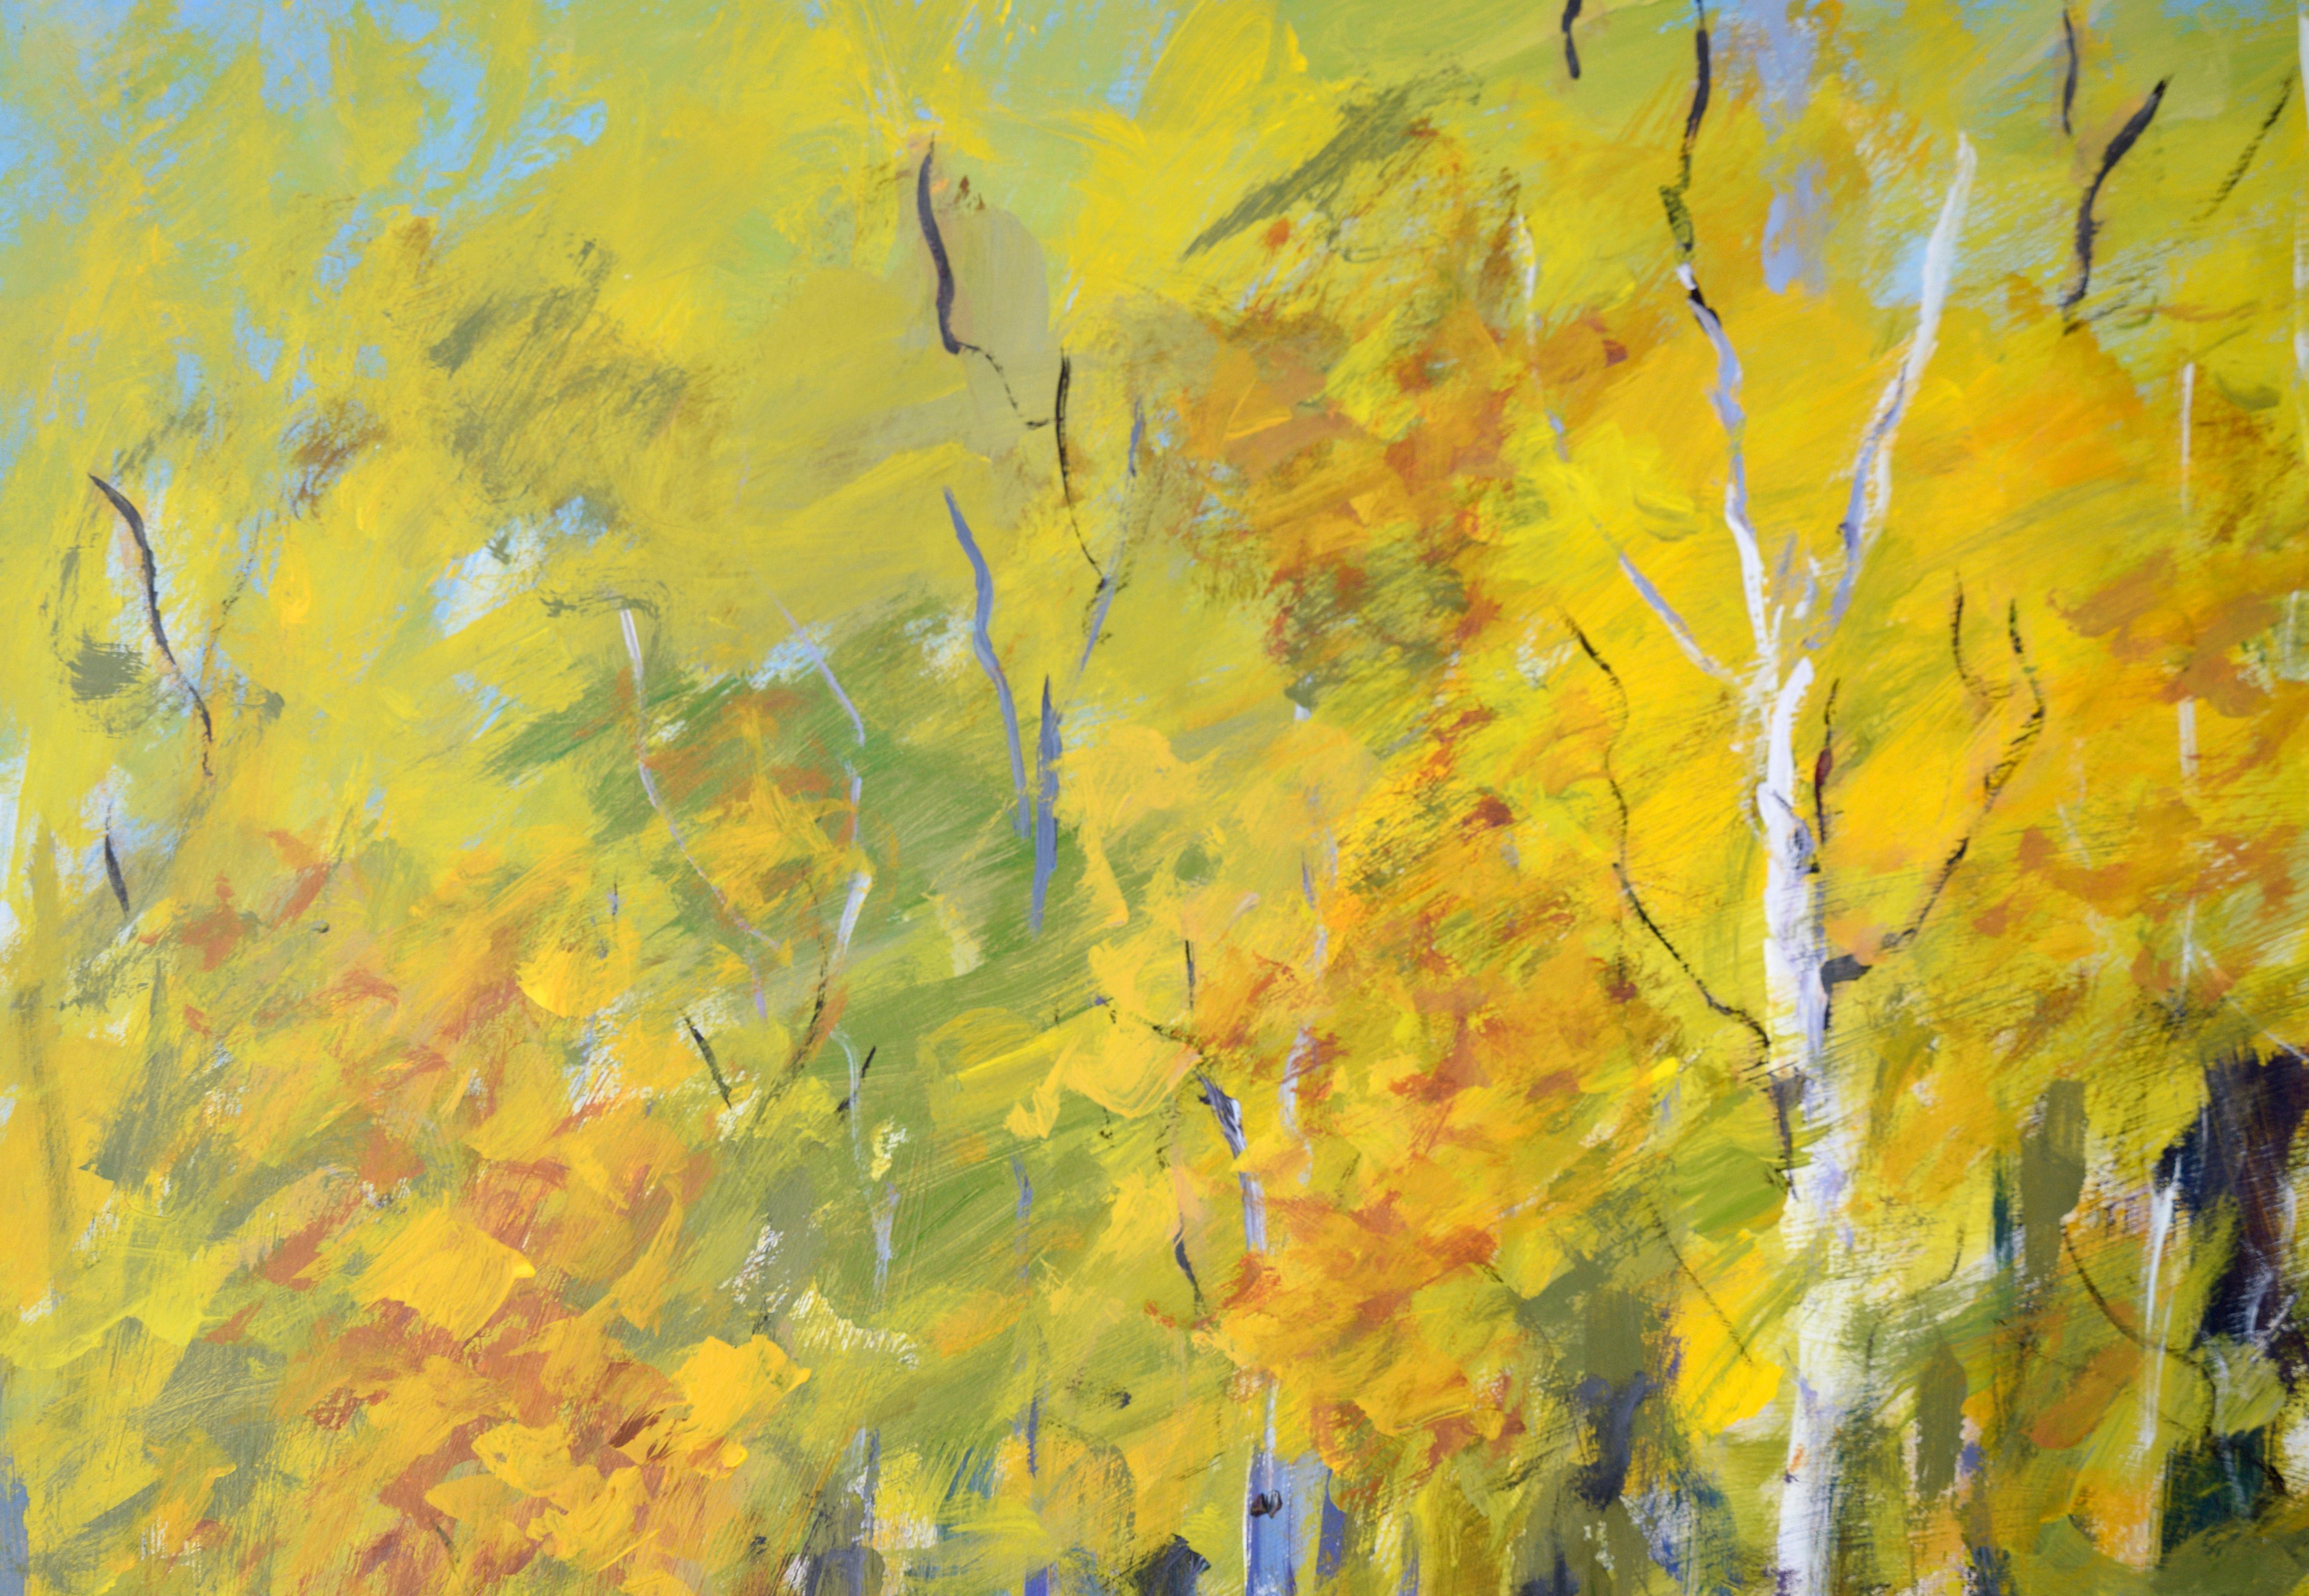 Bison in the Aspen Forest - Western Plein Aire Landscape in Acrylic on Board - Painting by Nick White